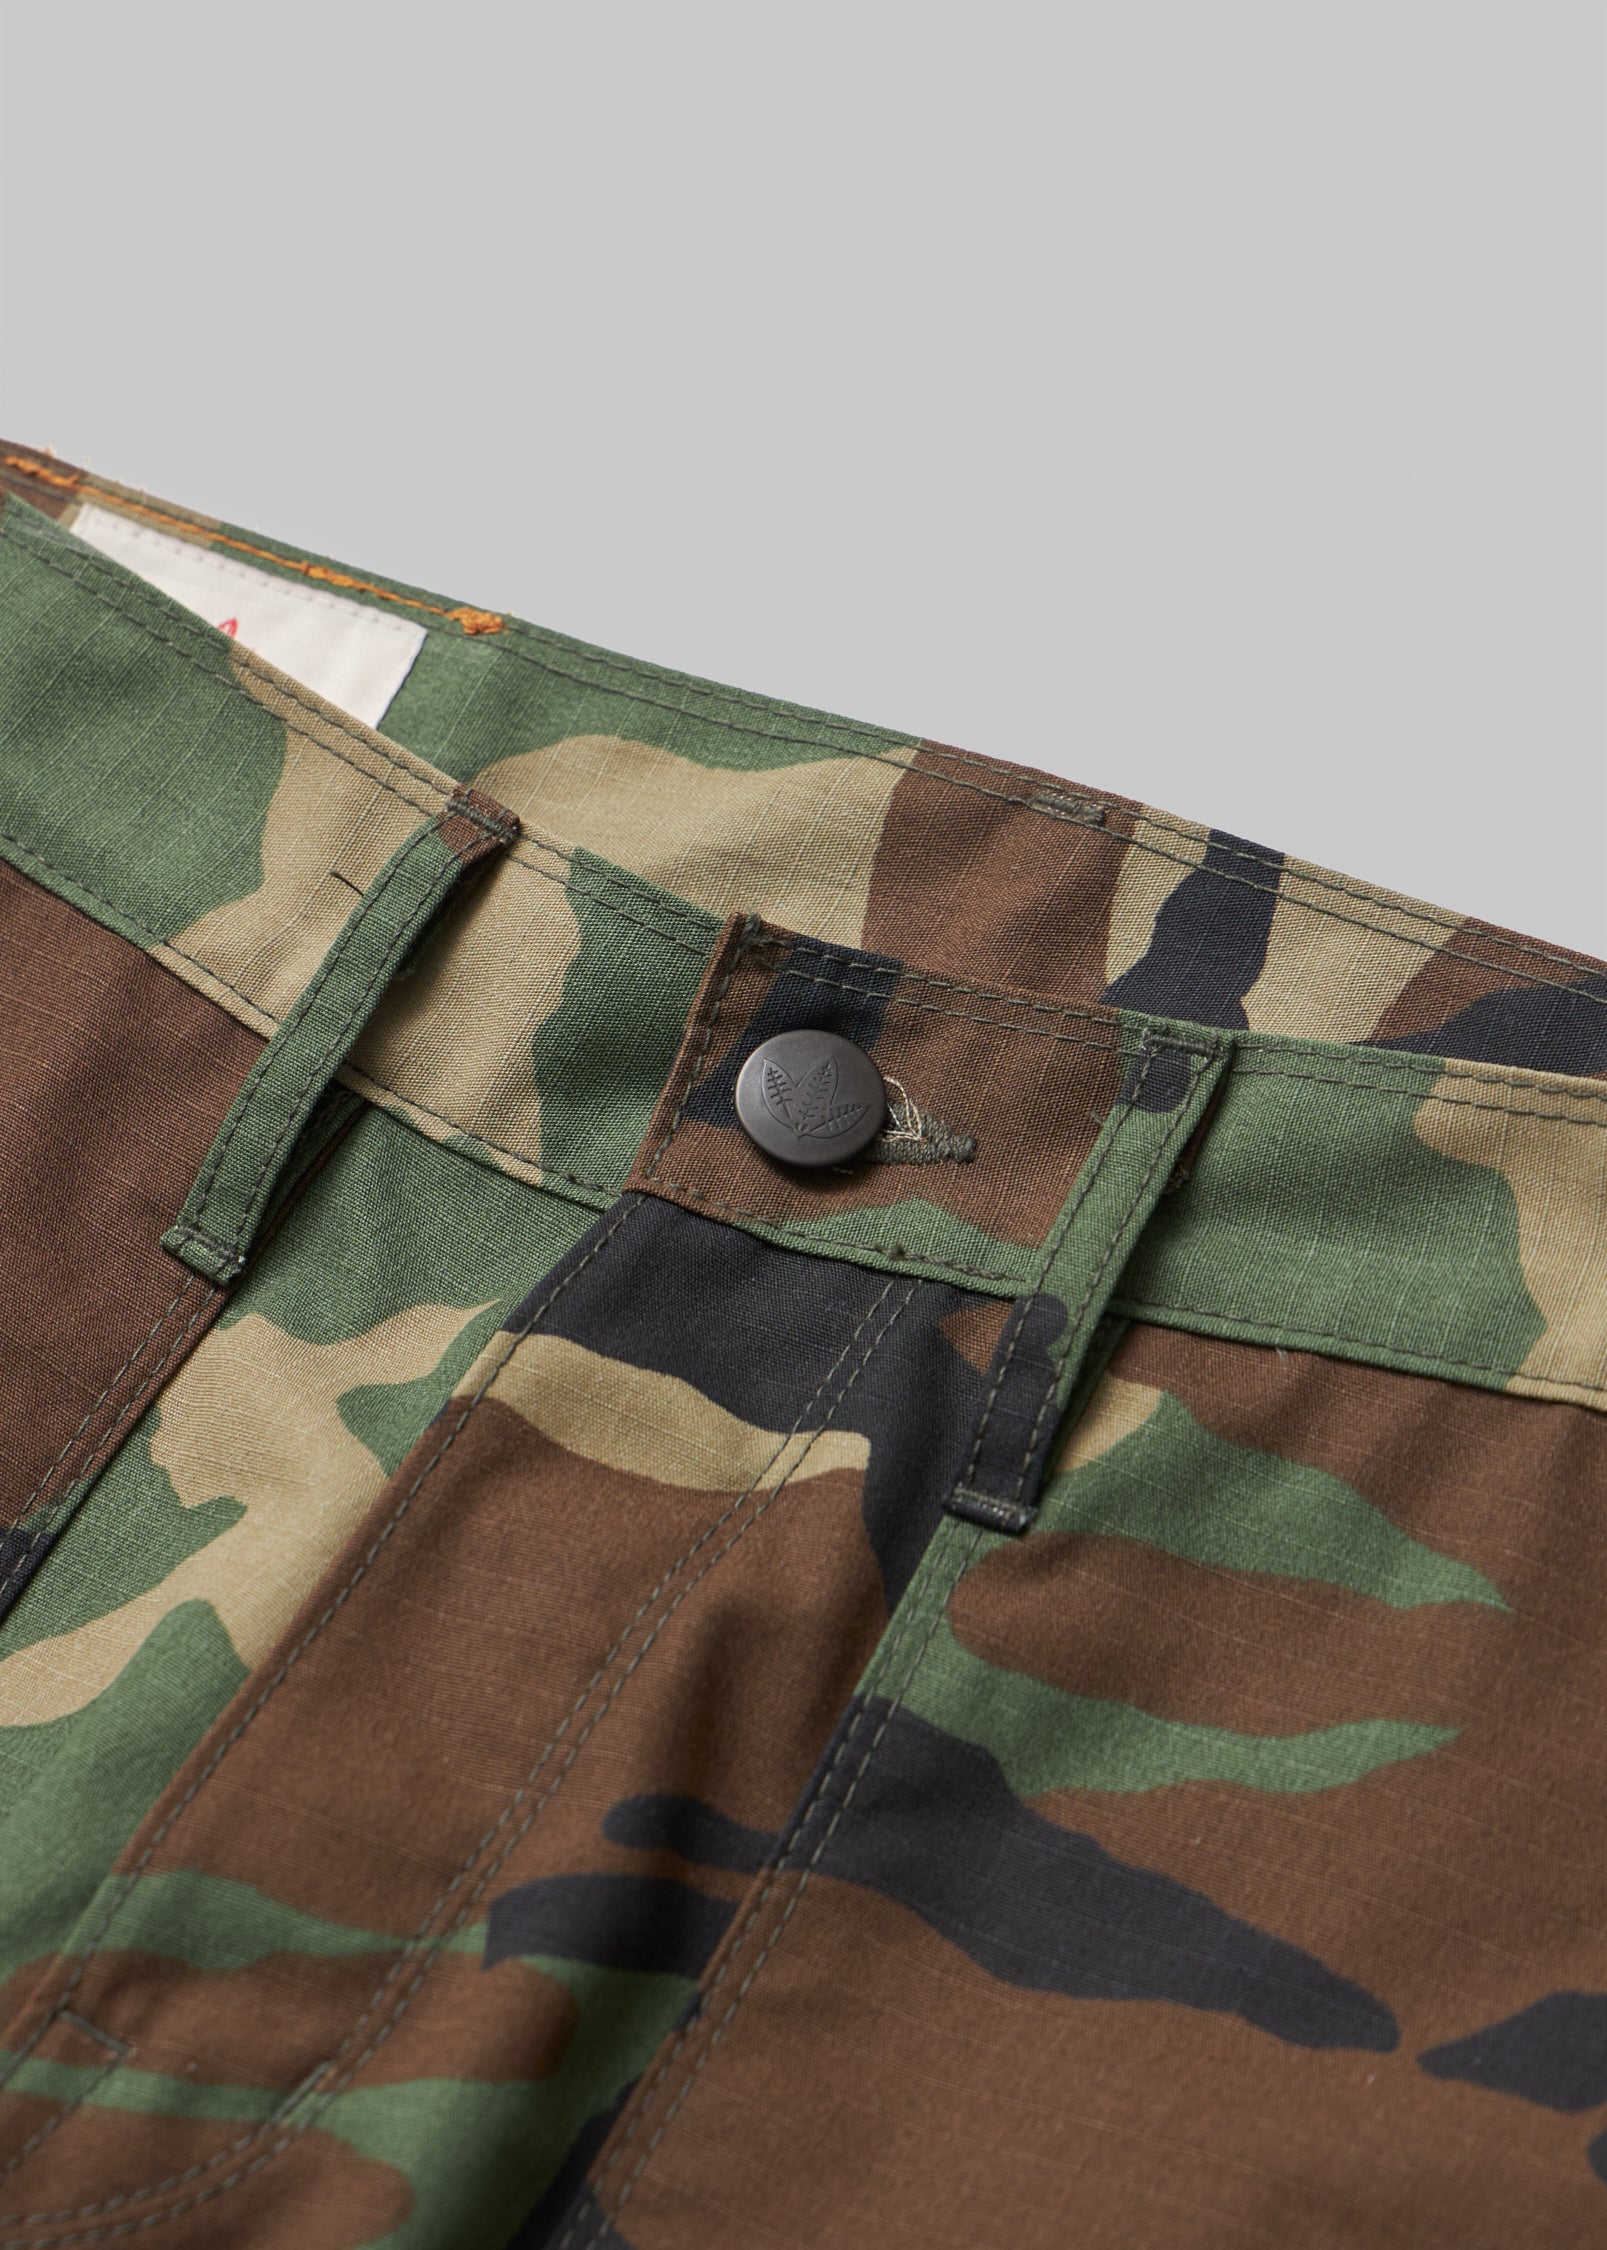 Shockoe Atelier Fatigue Trousers - Olive Ripstop